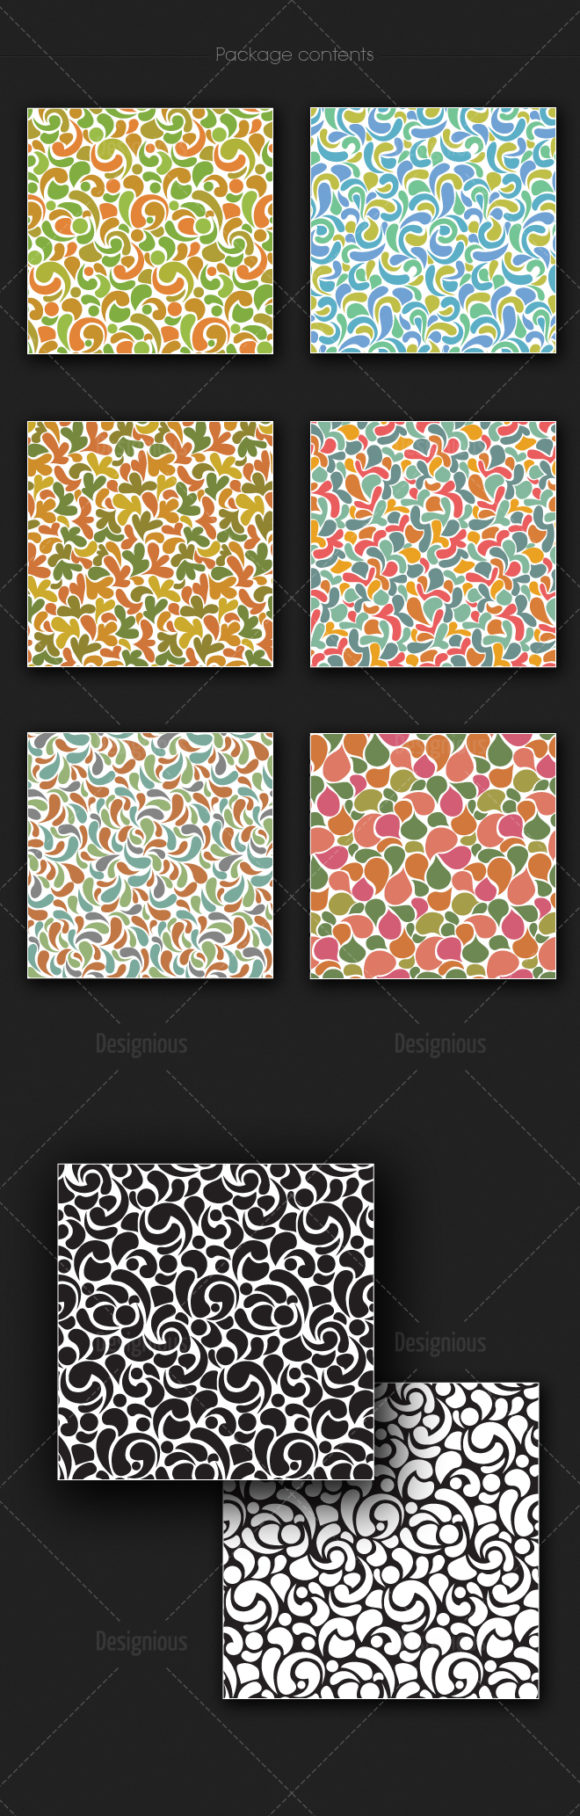 Seamless Patterns Vector Pack 152 2